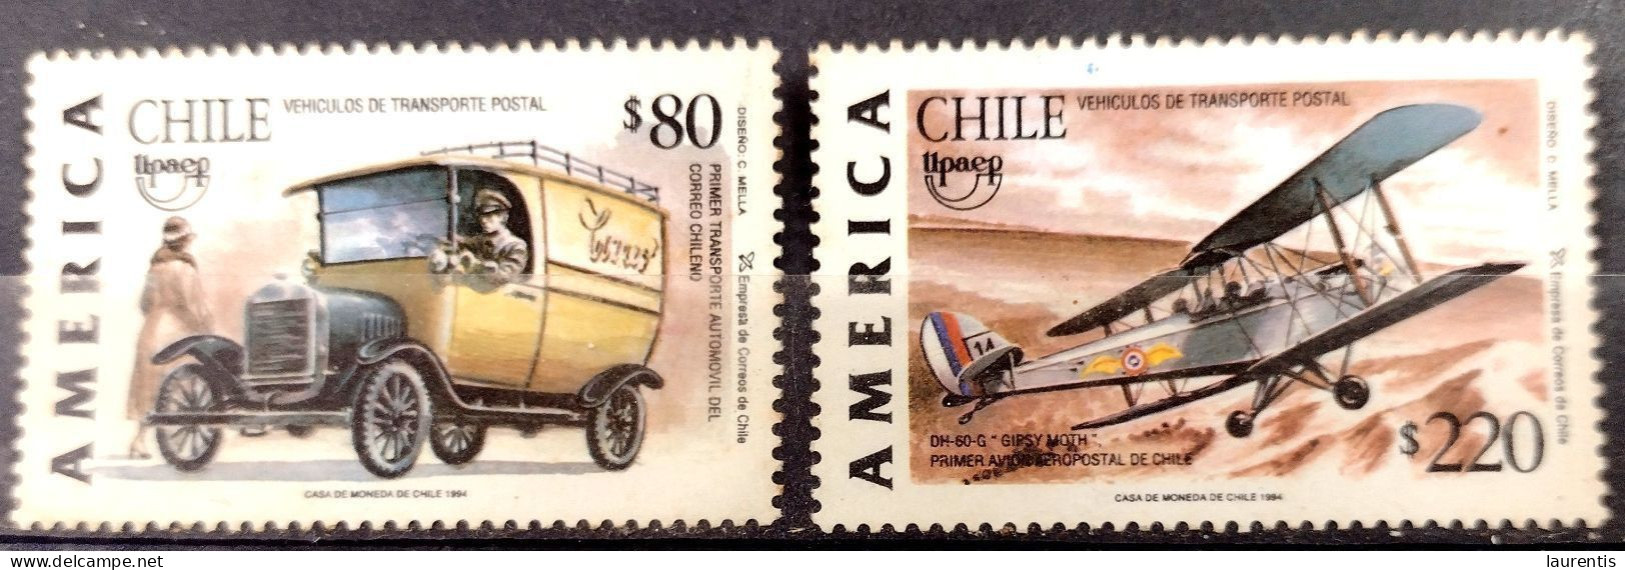 D7467. Trucks - Camions - UPAEP - Post - Chile Yv 1228-29 MNH - 1,25 (4) - Camions